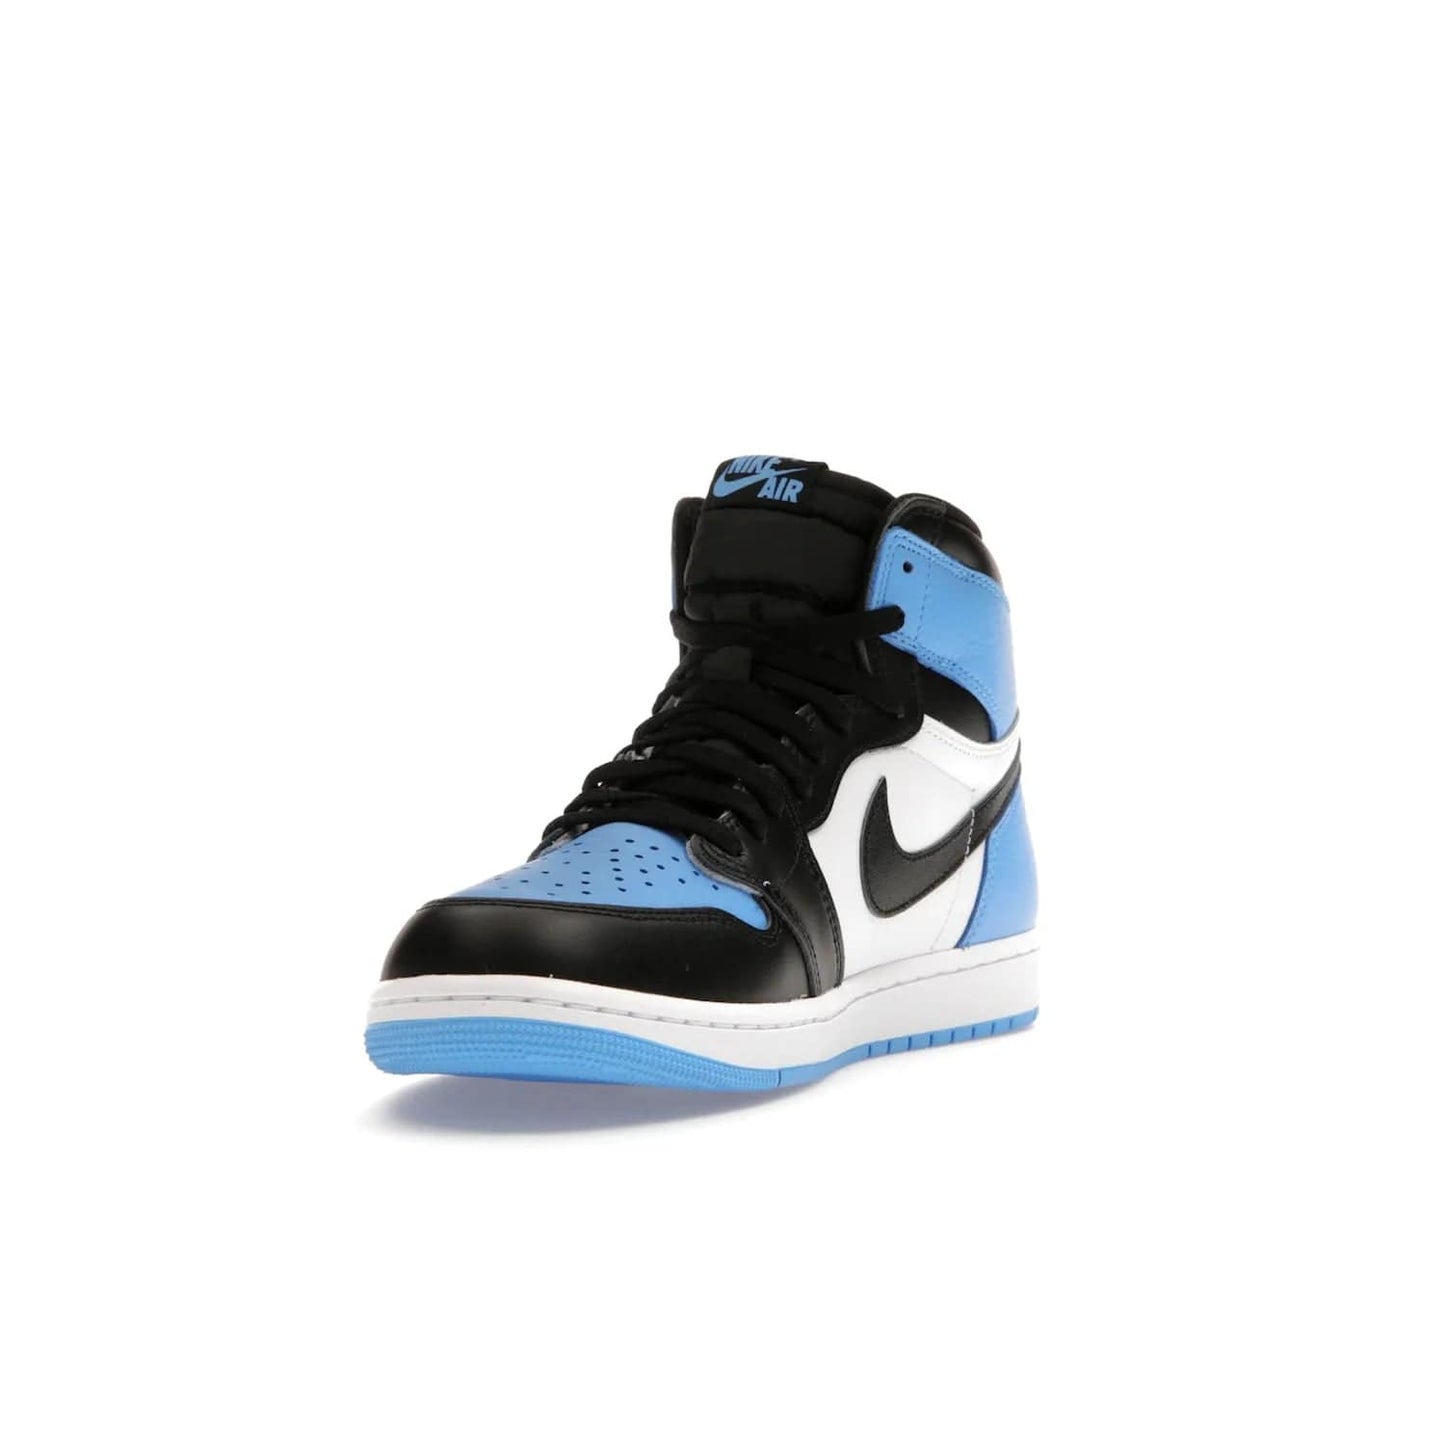 Jordan 1 Retro High OG UNC Toe - Image 13 - Only at www.BallersClubKickz.com - Jordan 1 High OG UNC Toe is a fashionable, high-quality sneaker featuring University Blue, Black White and White. Releasing July 22, 2023, it's the perfect pick up for sneakerheads.